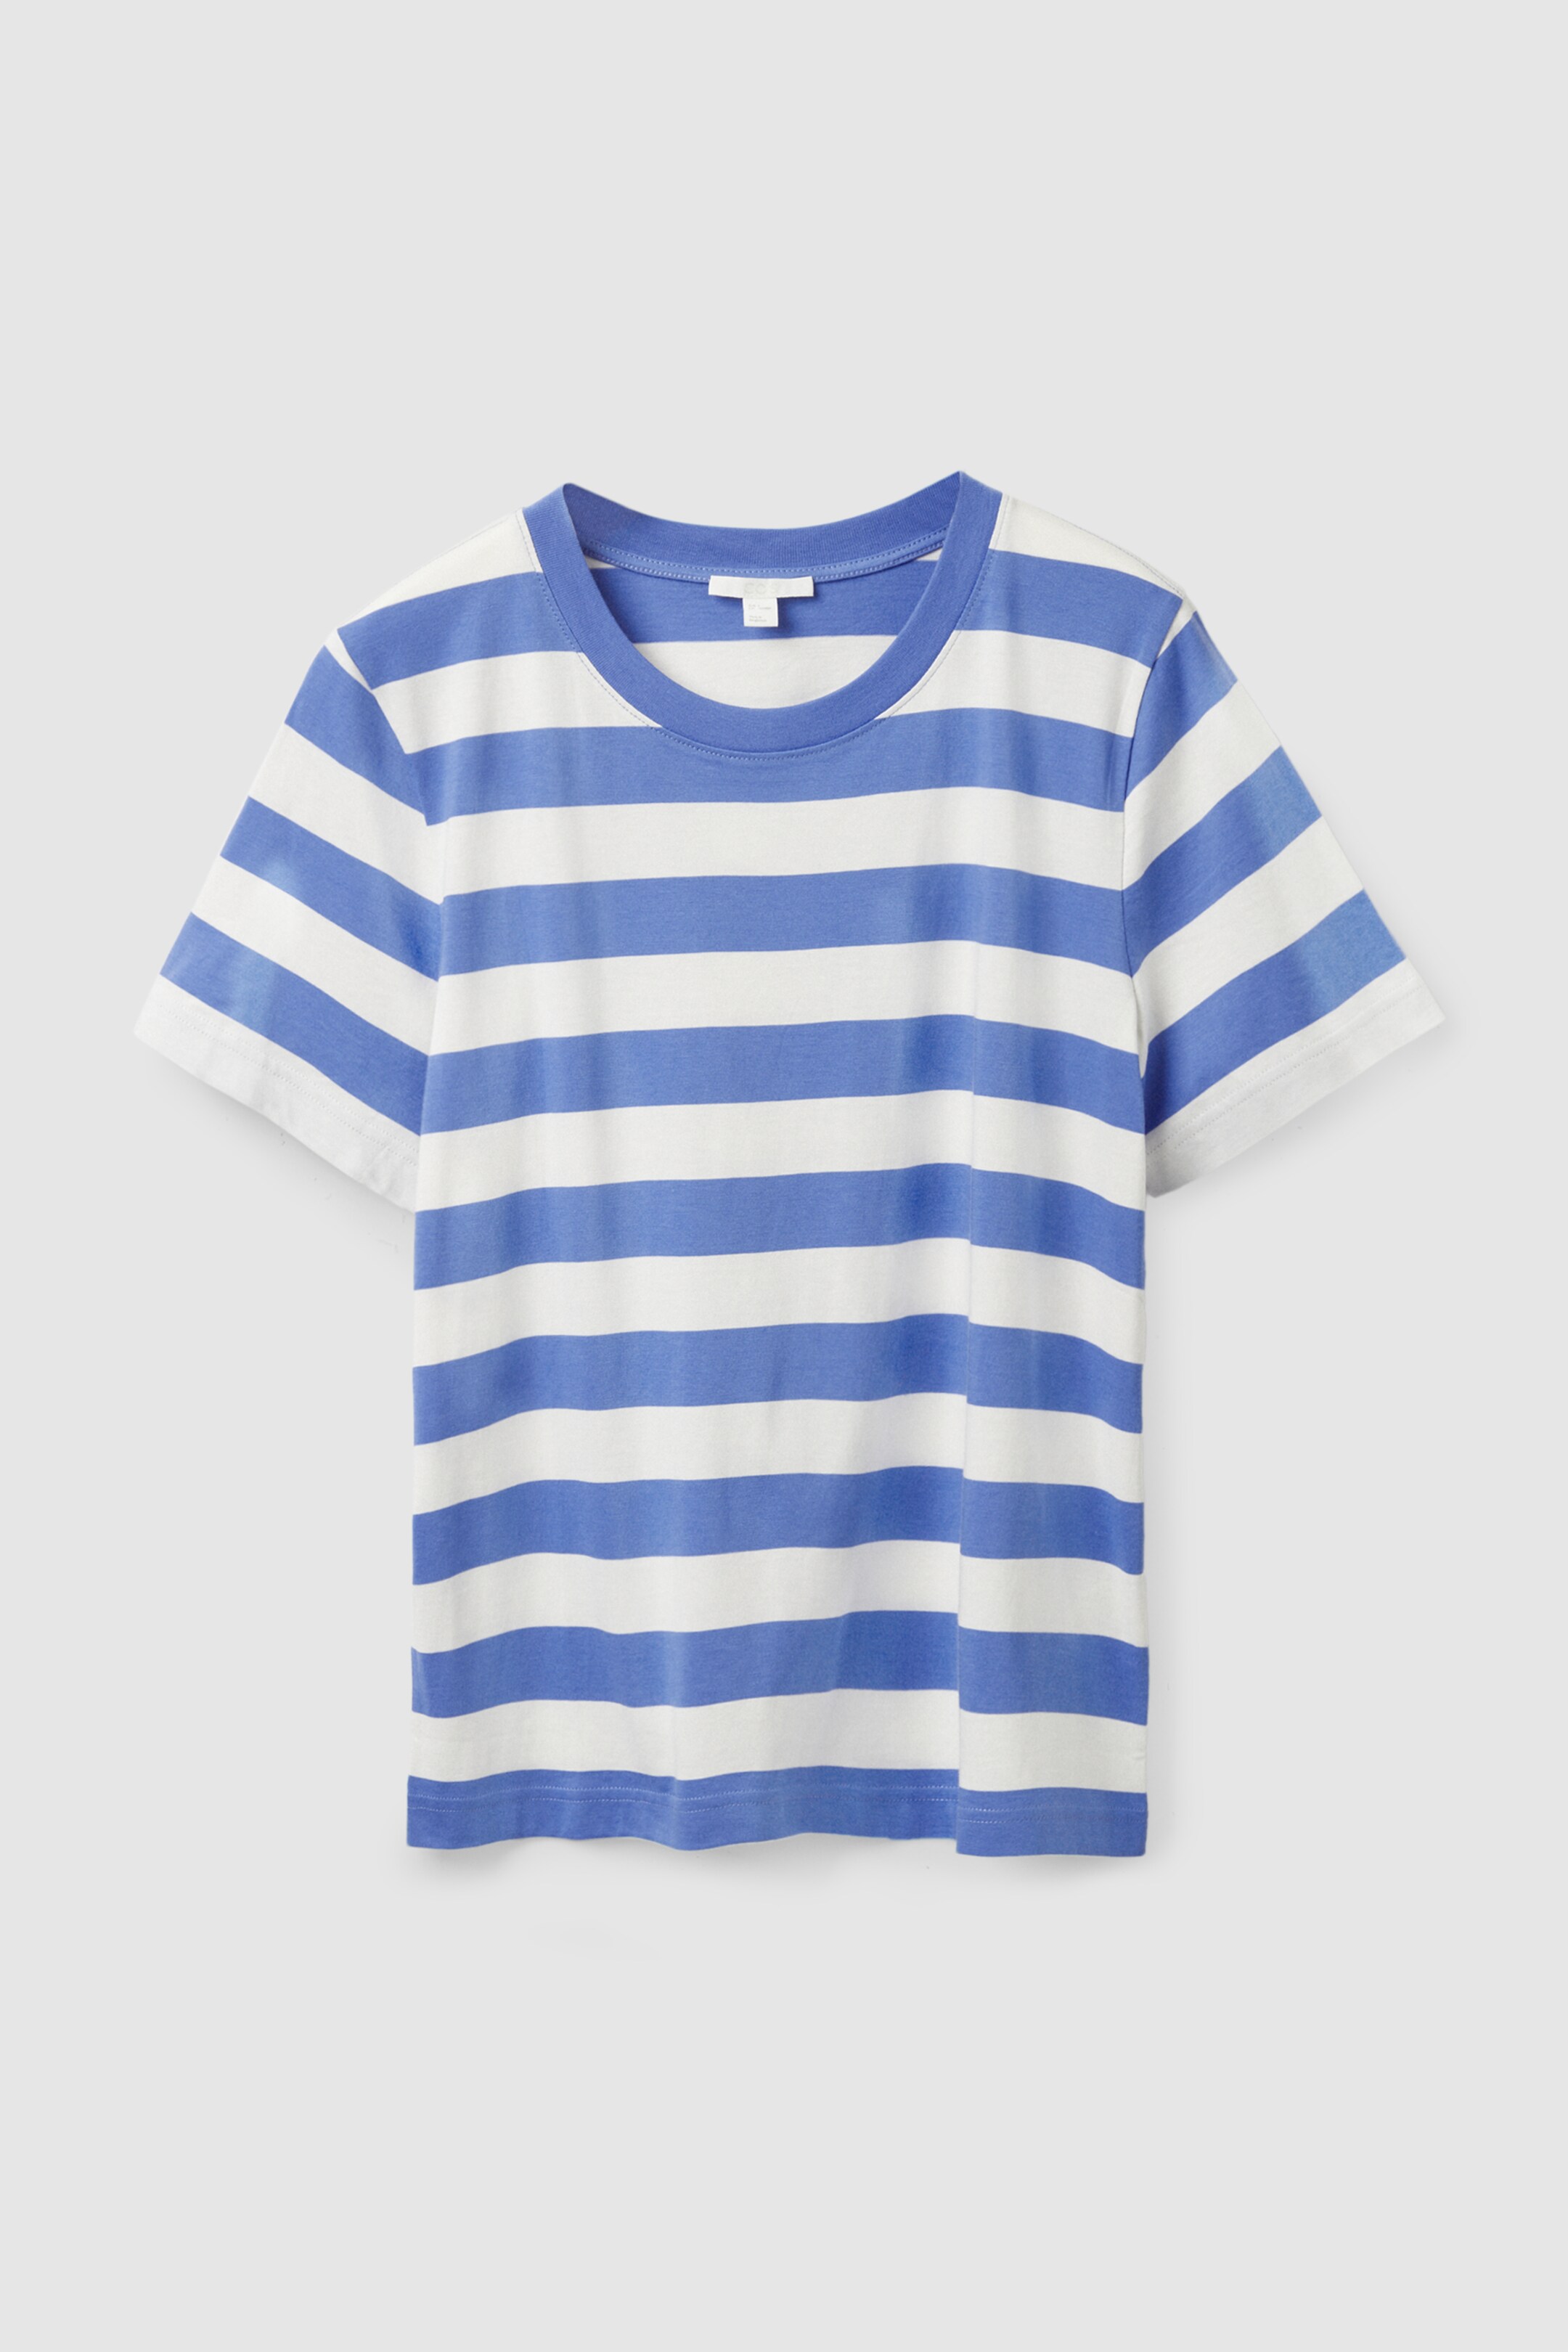 Front image of cos REGULAR FIT T-SHIRT in blue / white